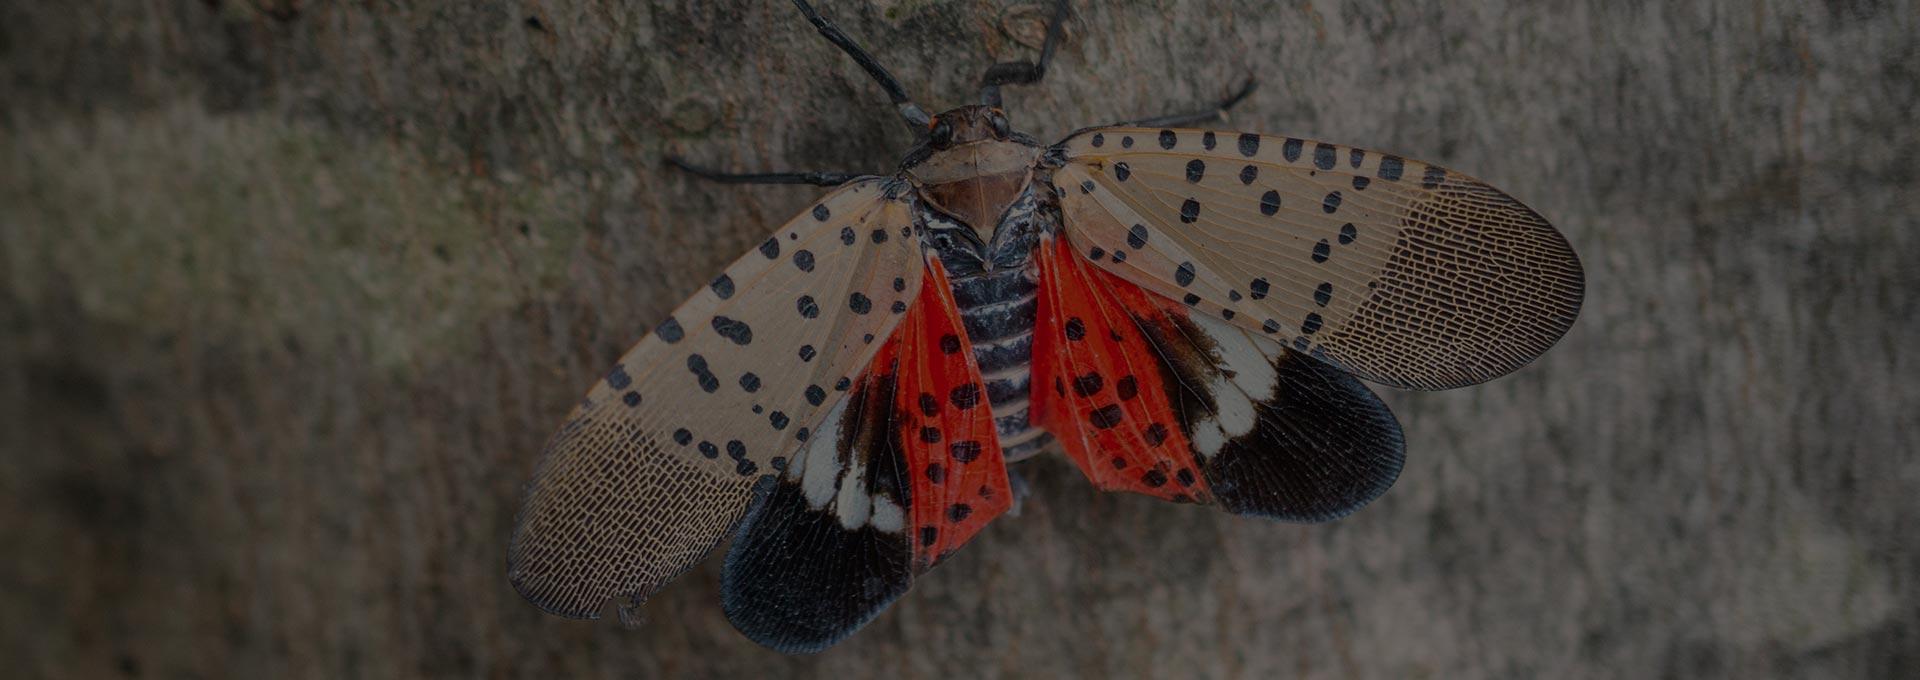 Spotted Lanternfly, Stage 4